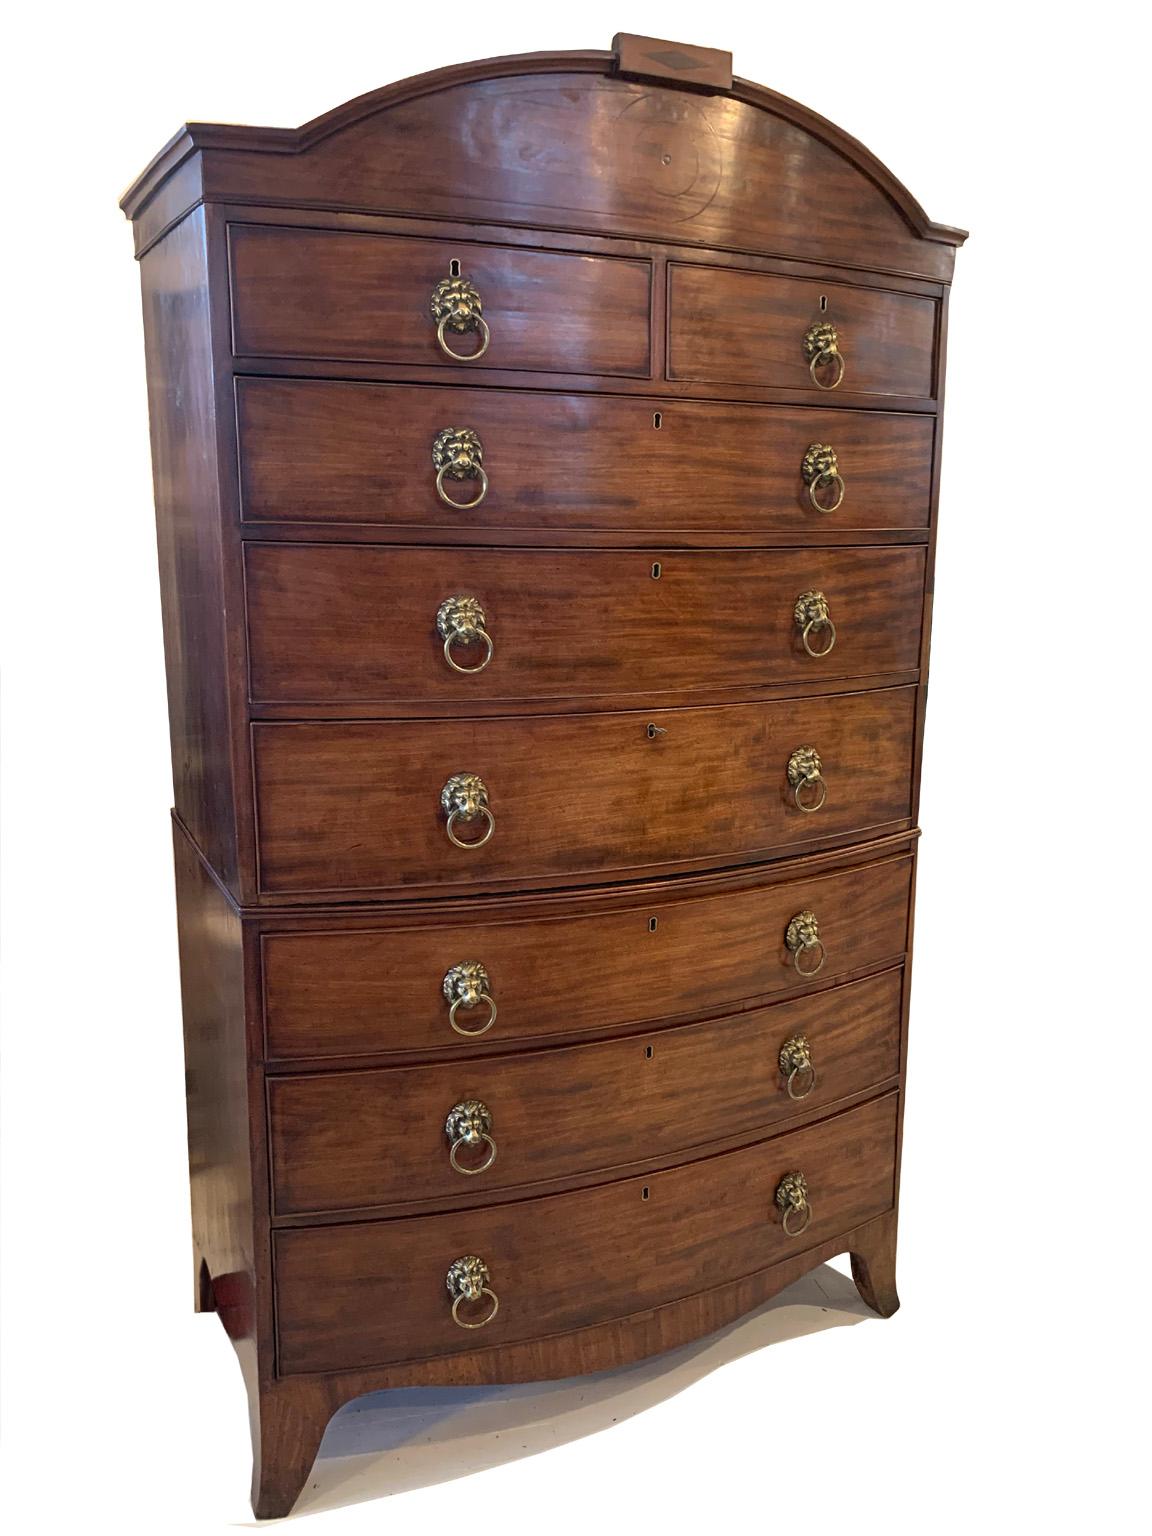 19th Century Early Tall English Sheridan Bow Front Chest/Desk